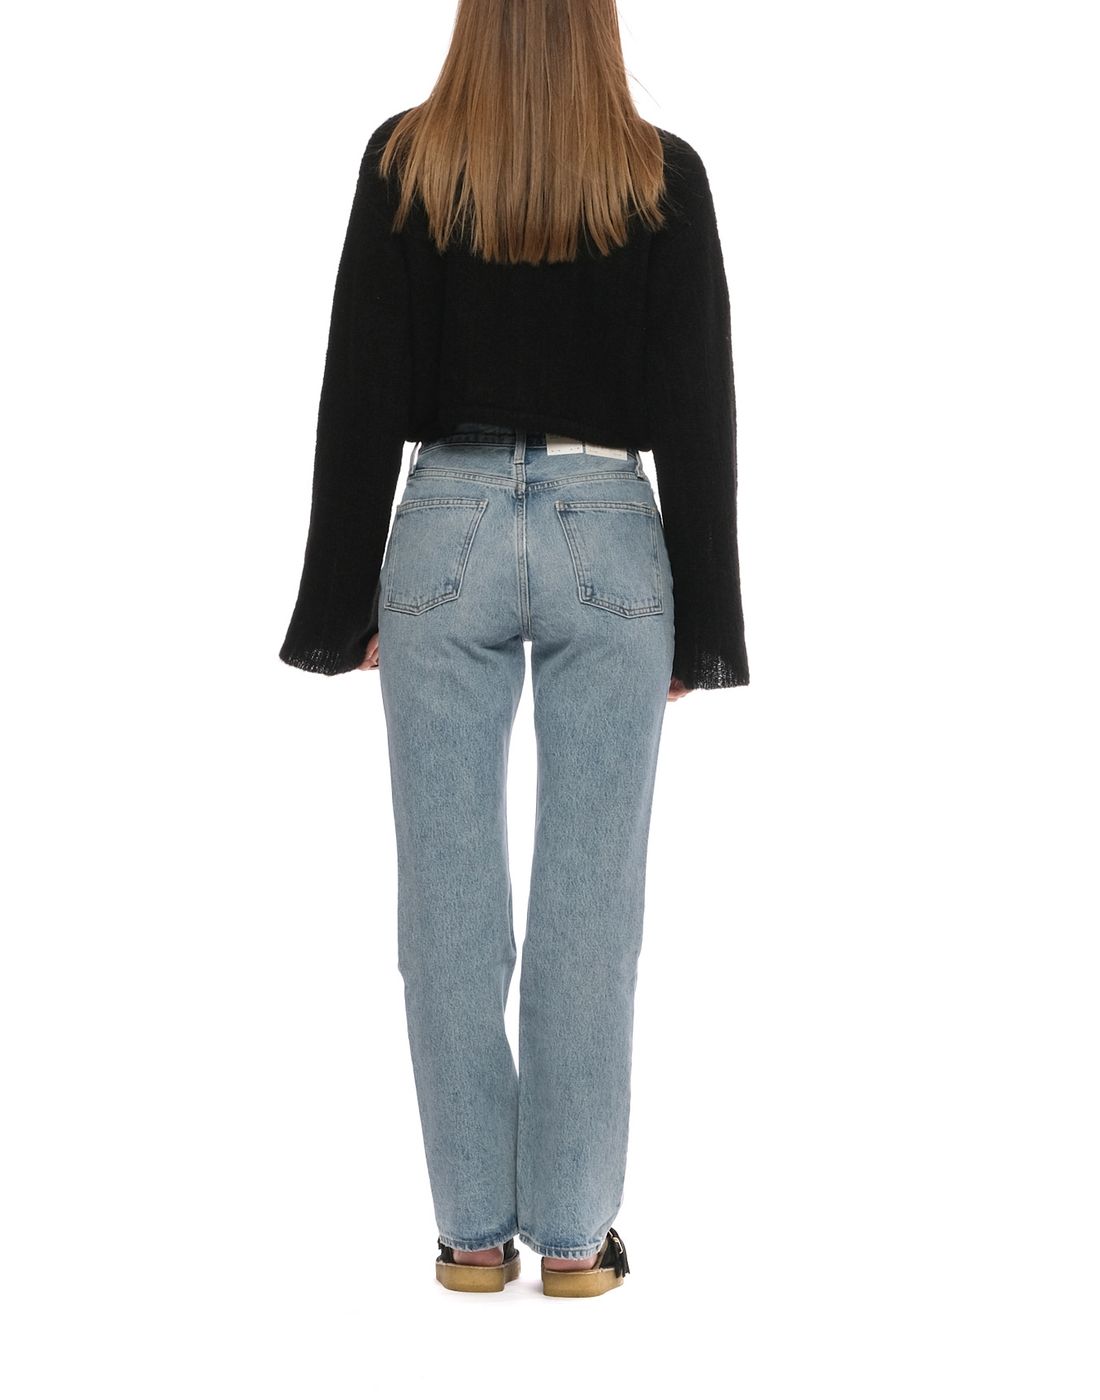 Jeans woman a9075 1206 Sway Agolde